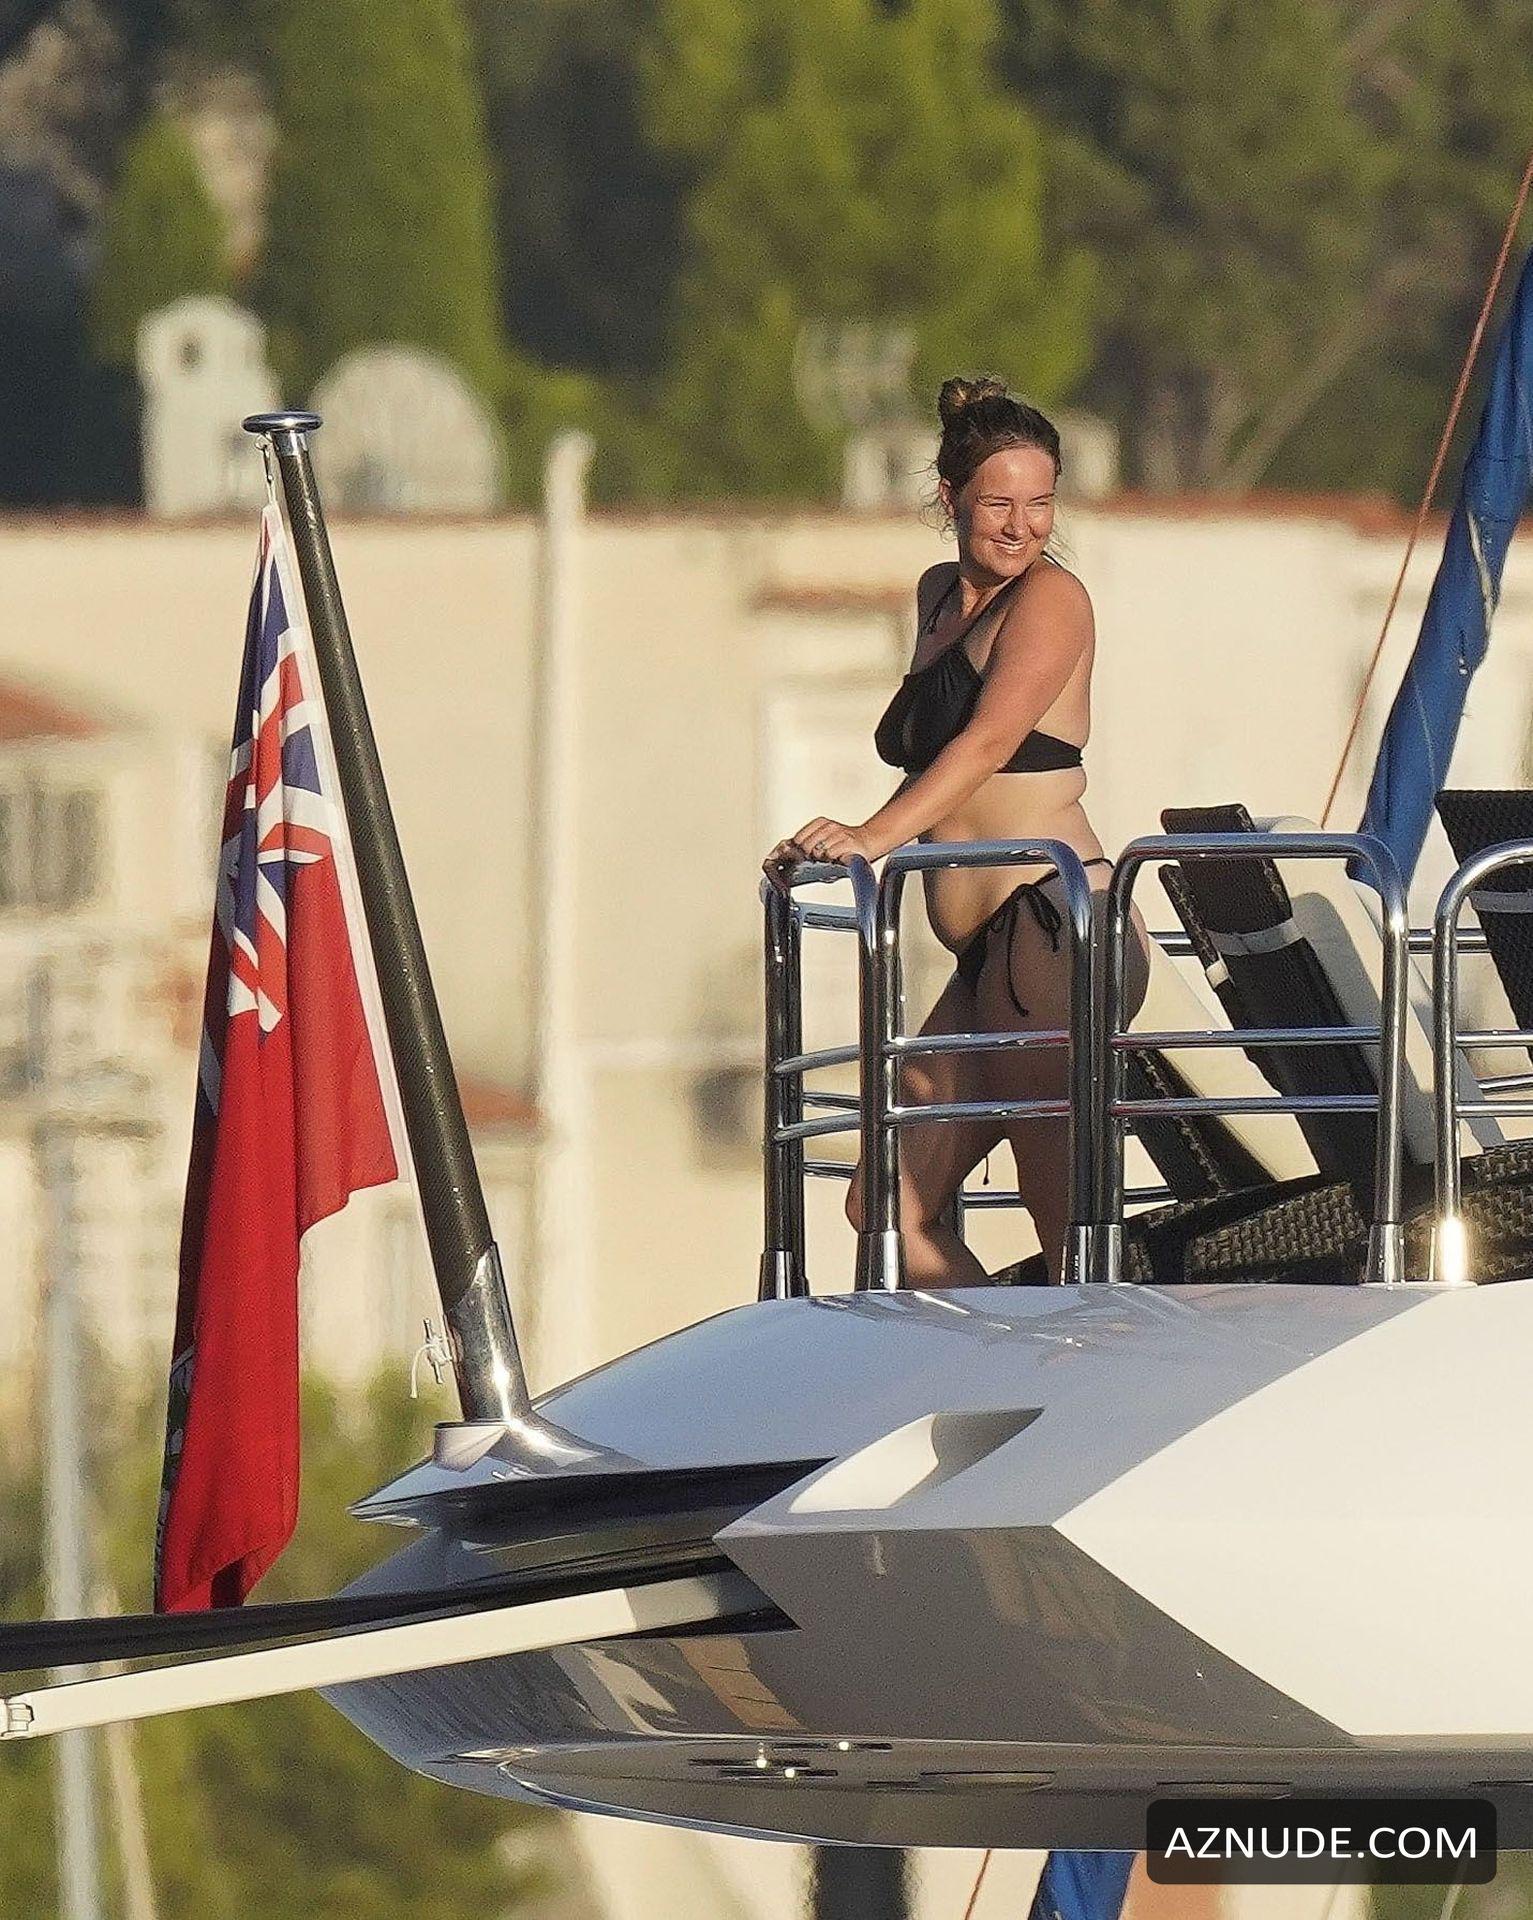 Dee Devlin And Conor Mcgregor On Their Yacht At Villefranche Sur Mer In 